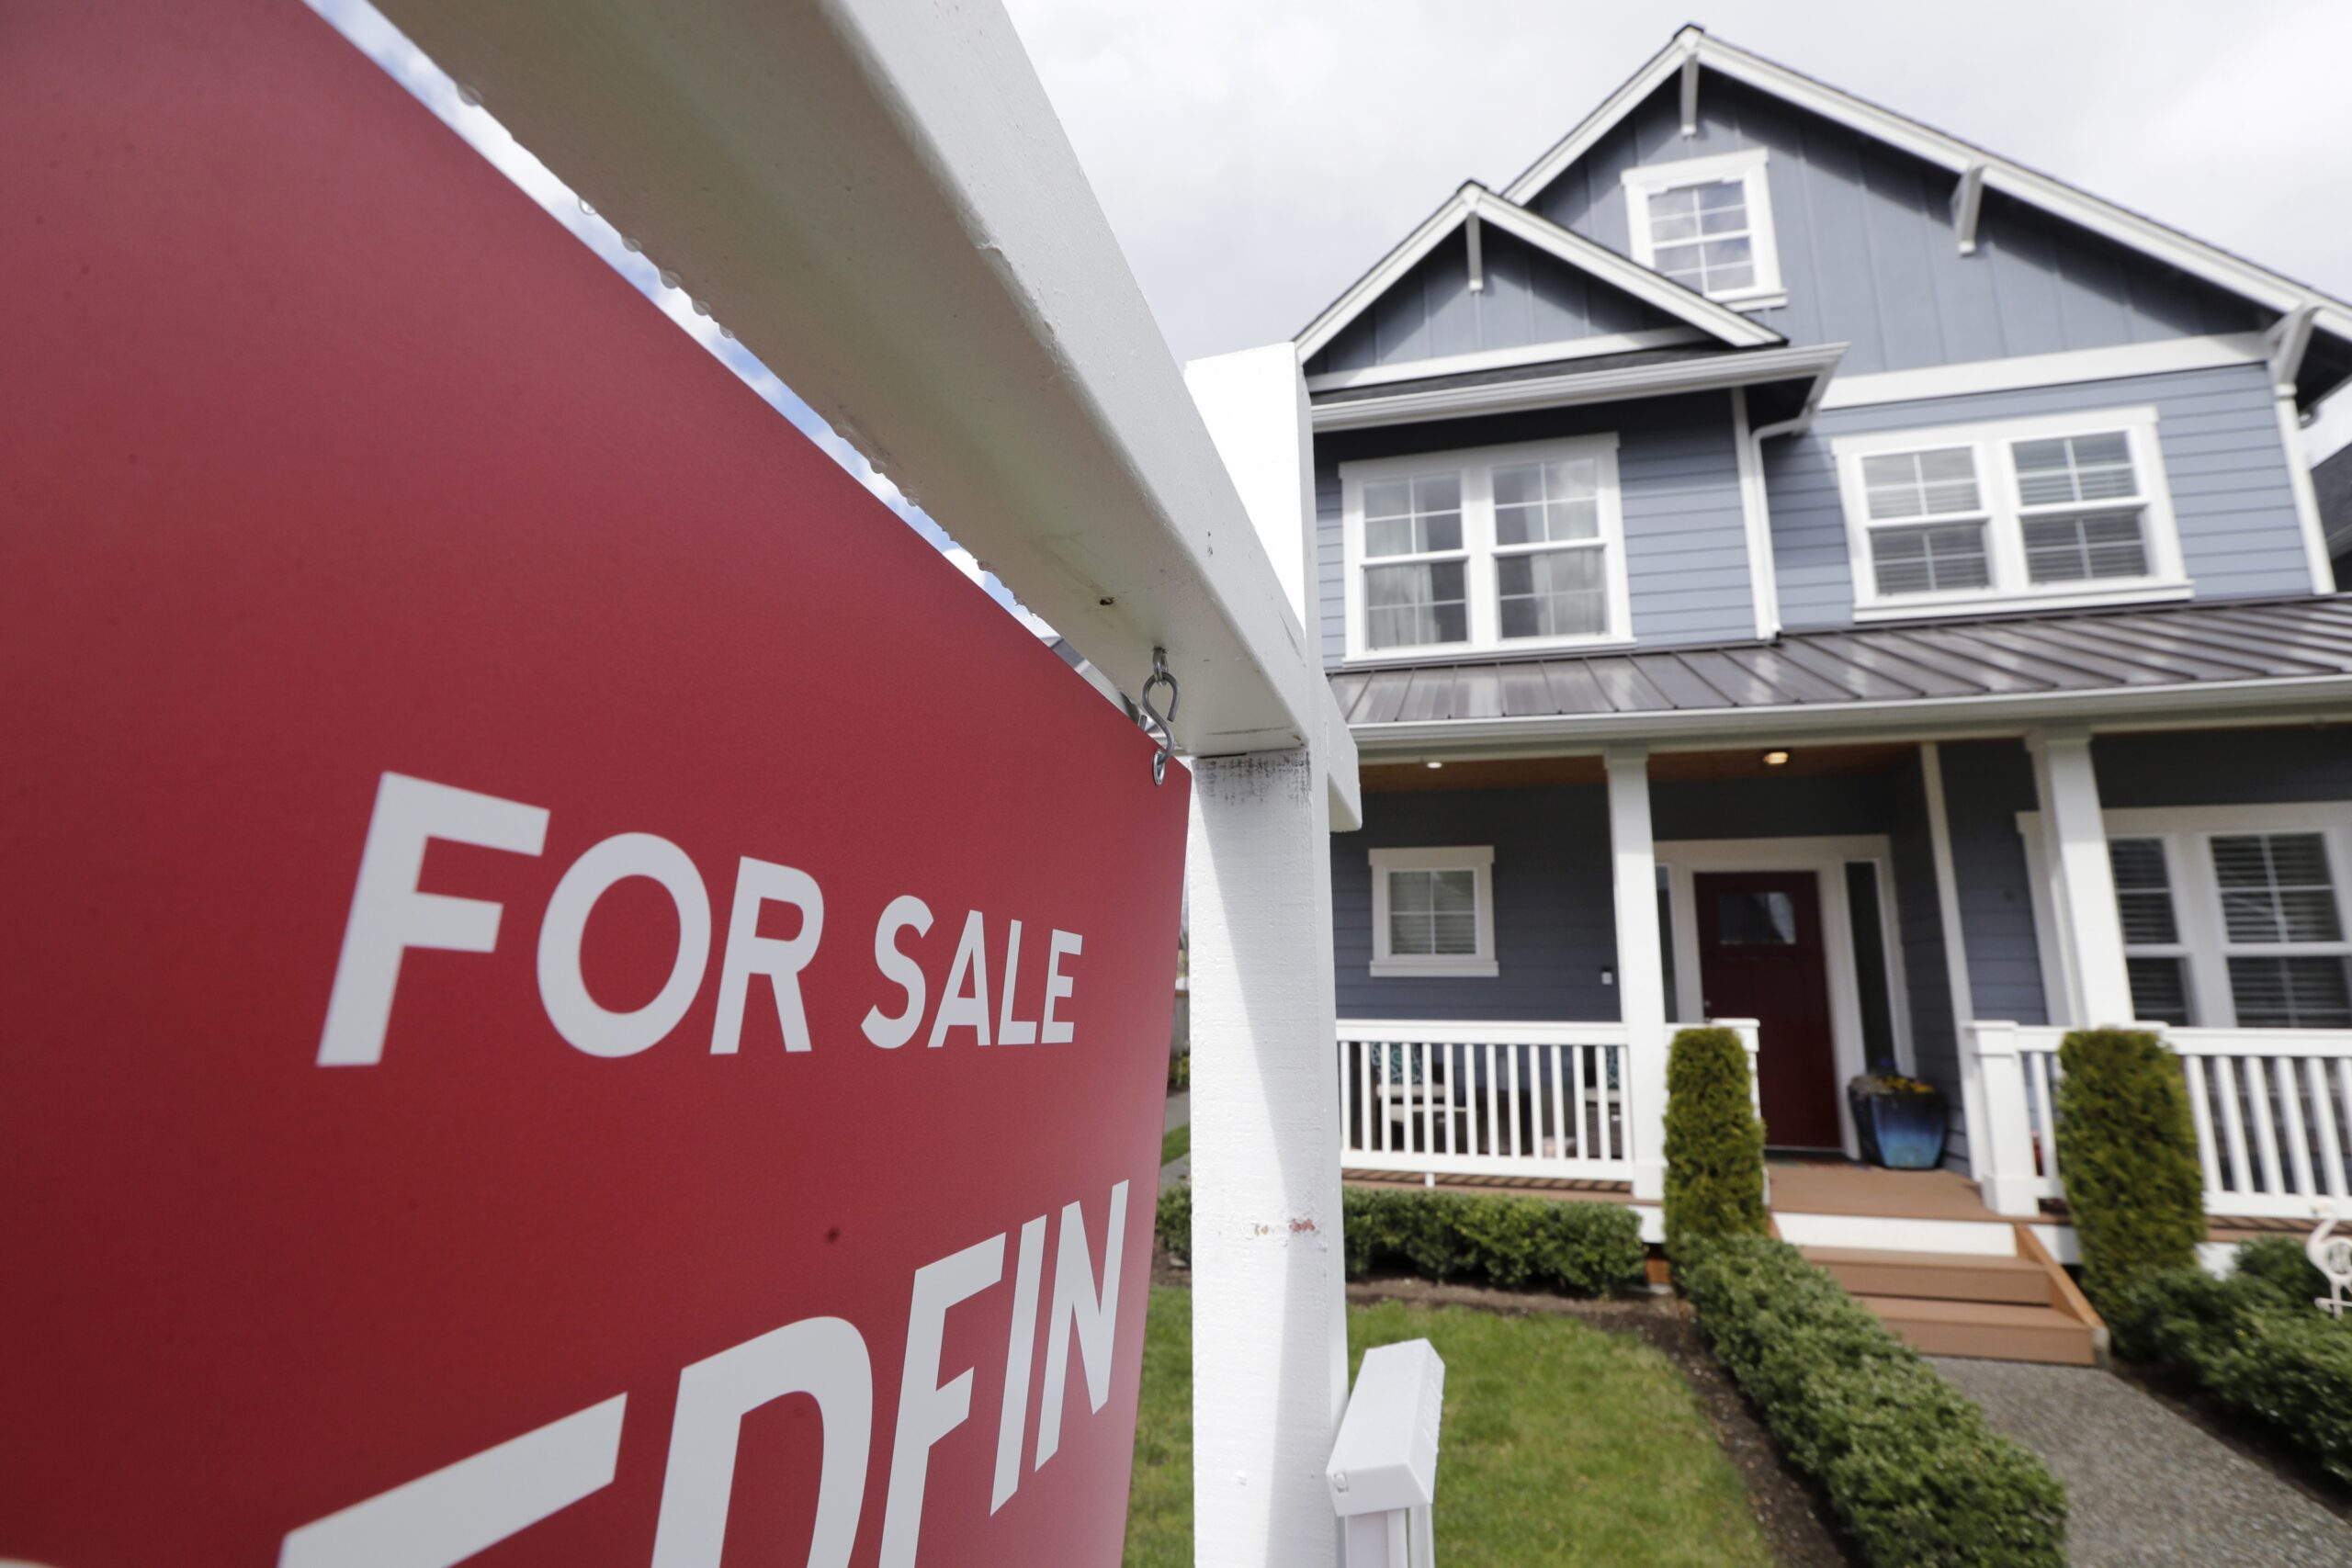 Weekend Roundup: Racial disparities in homeownership found across the state